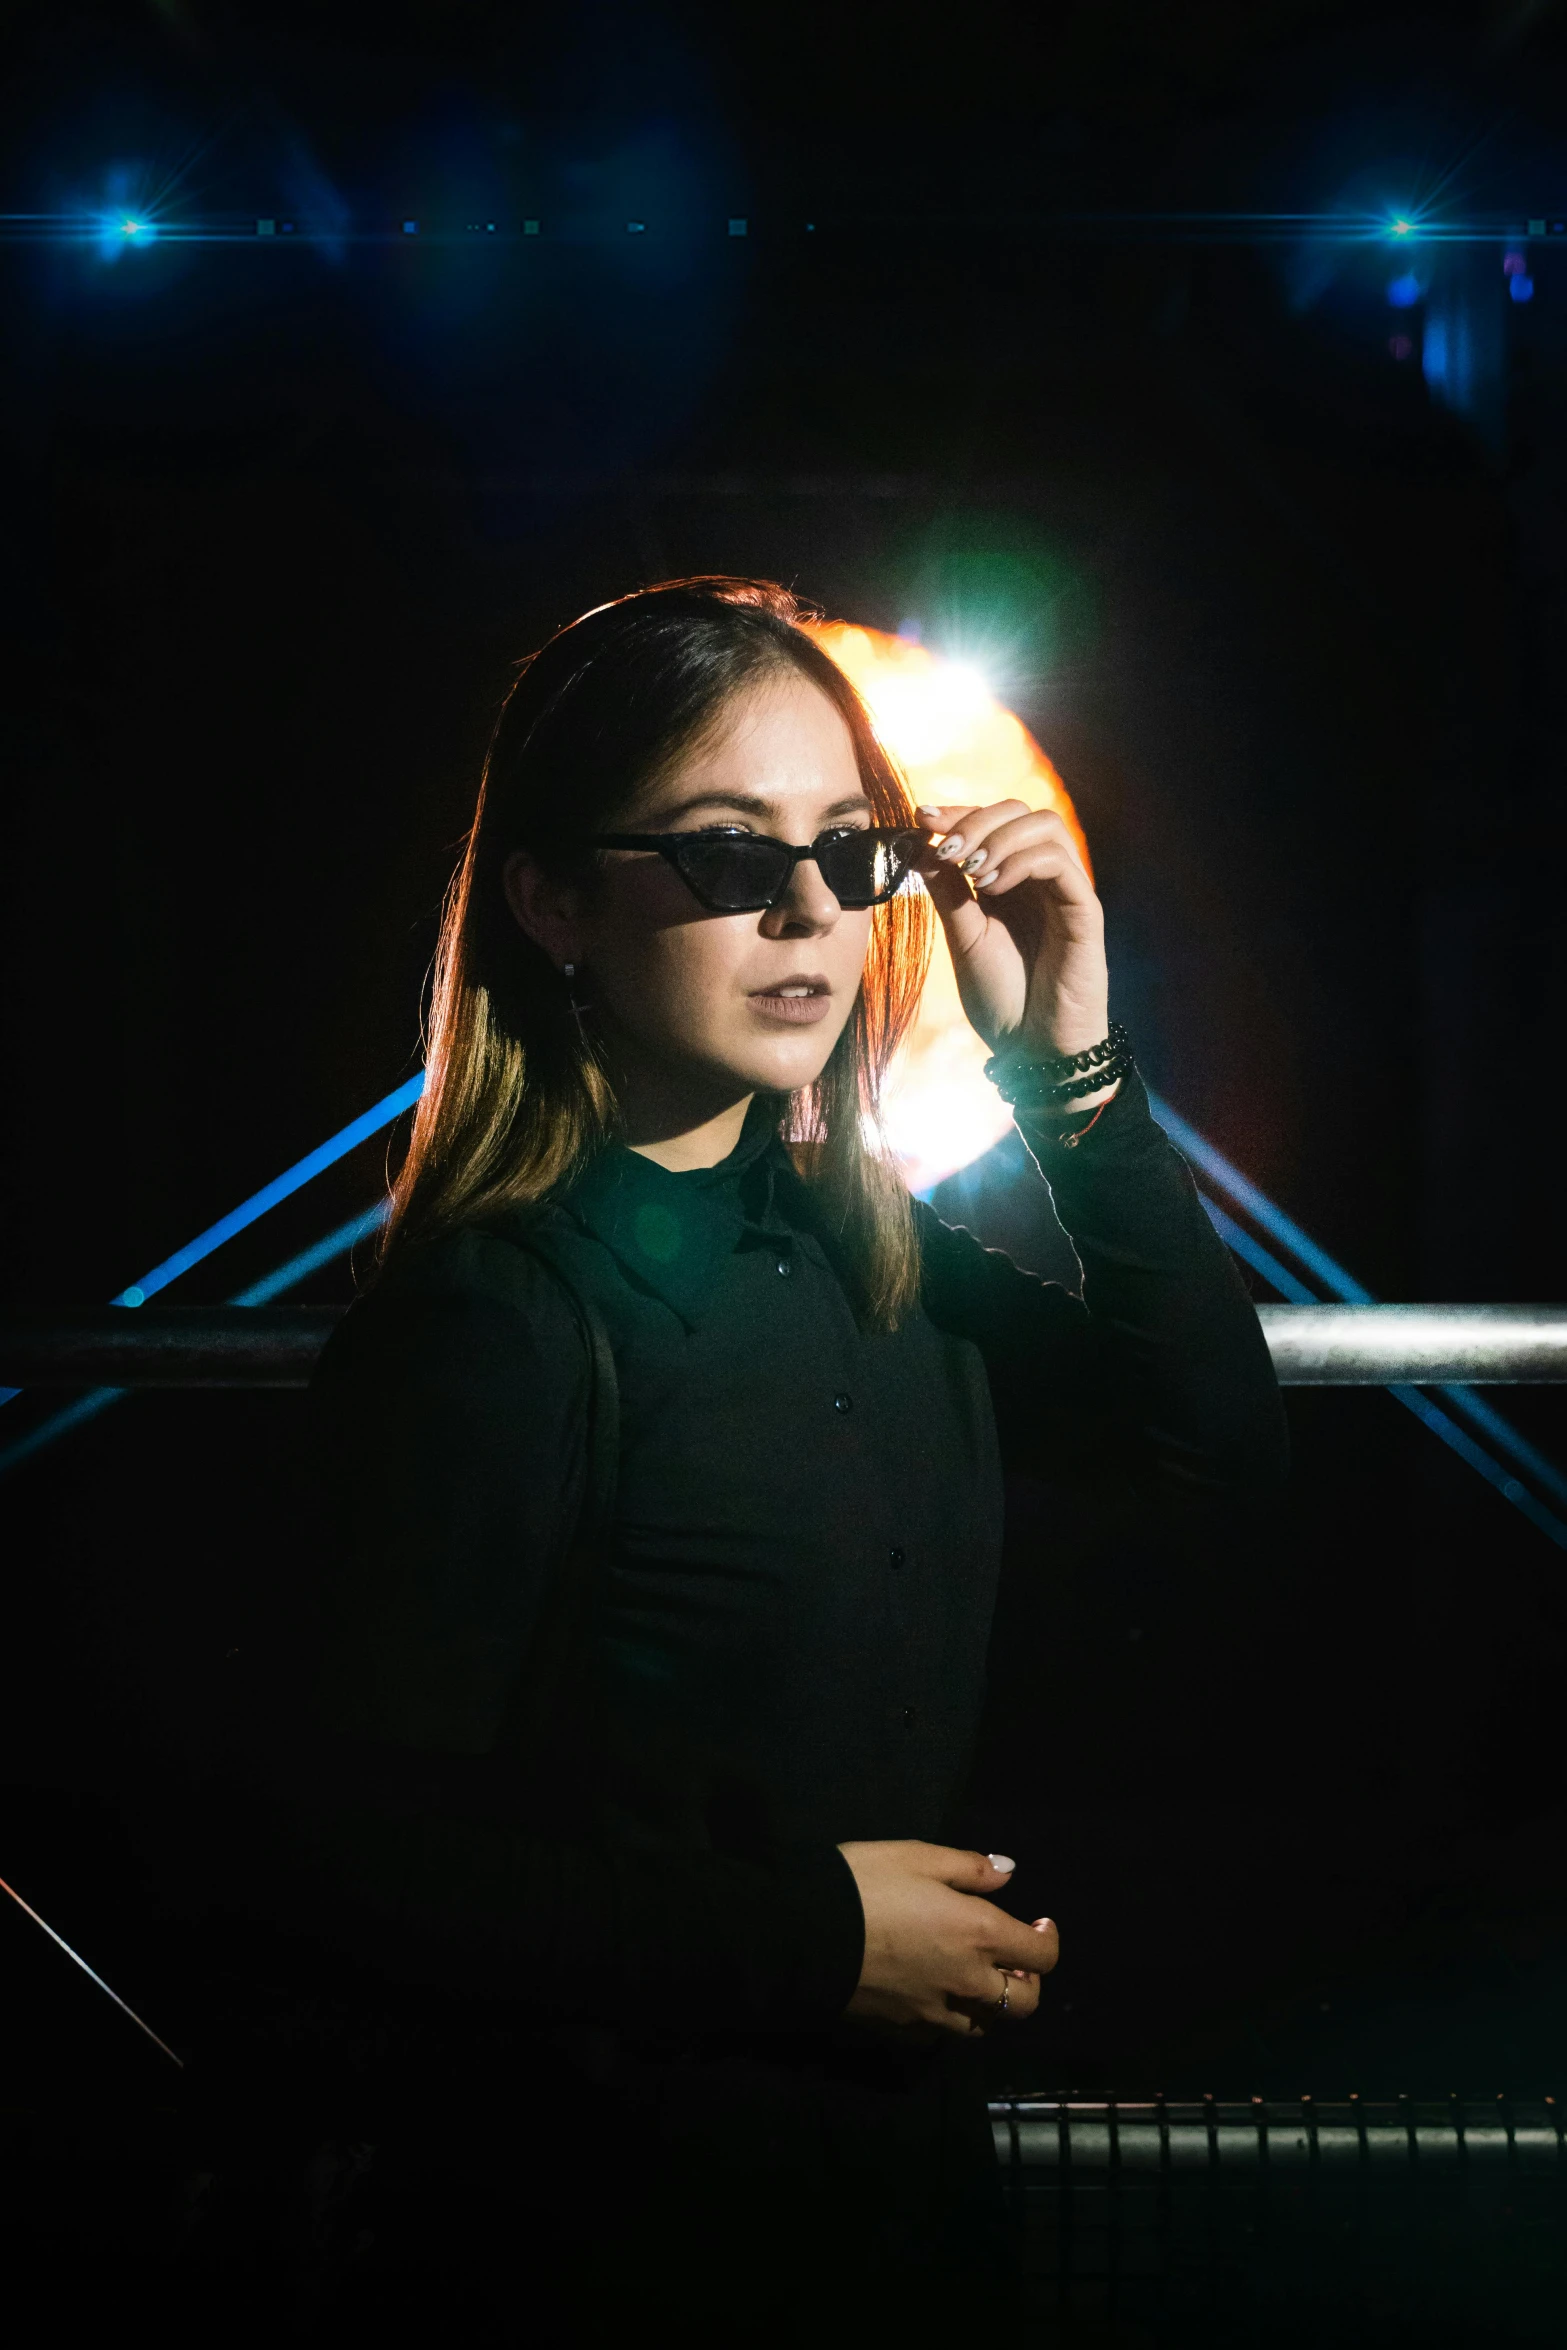 a girl standing at night wearing sunglasses